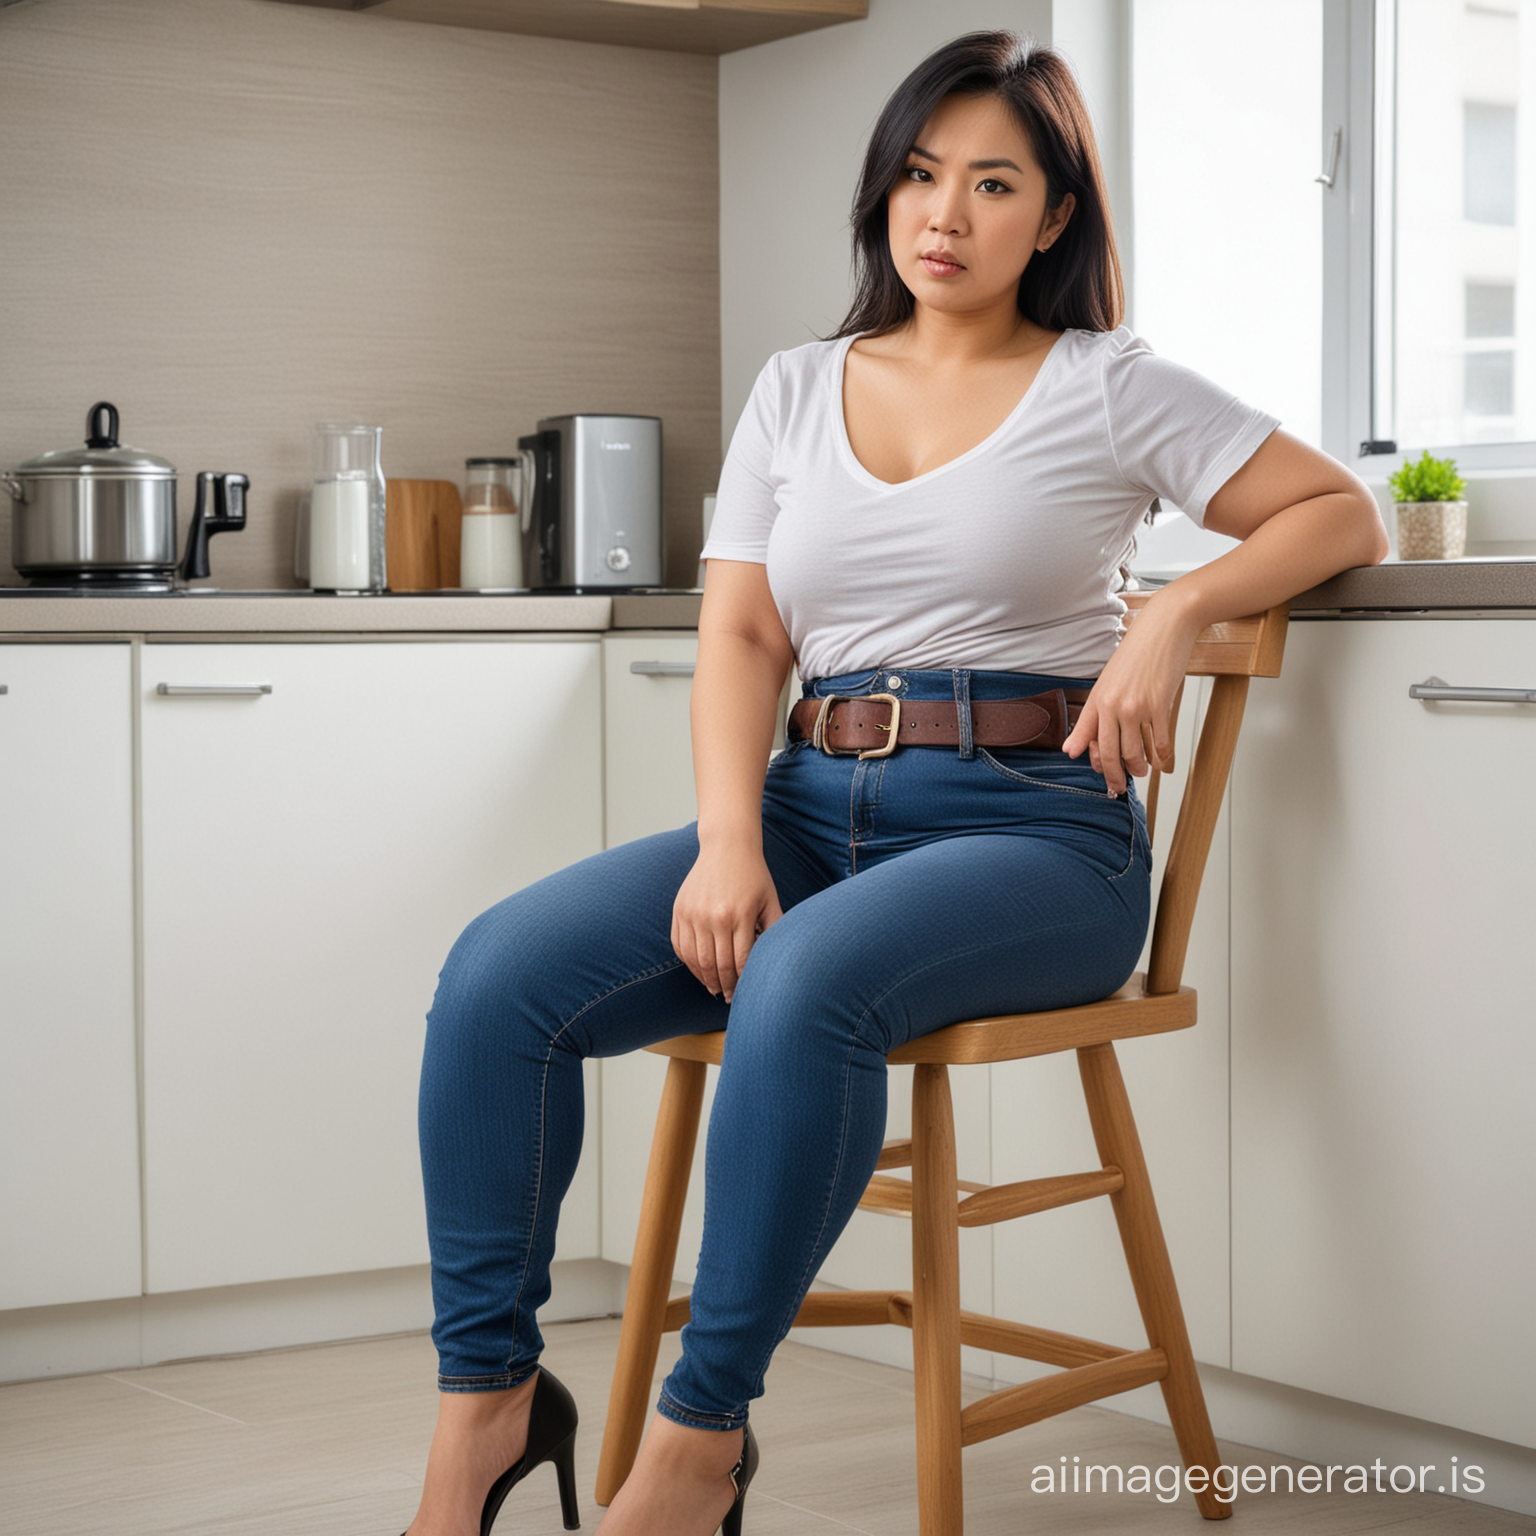 real photo of an angry,curvy asian mother,sitting on a chair,stern face,skinny jeans with belt,kitchen